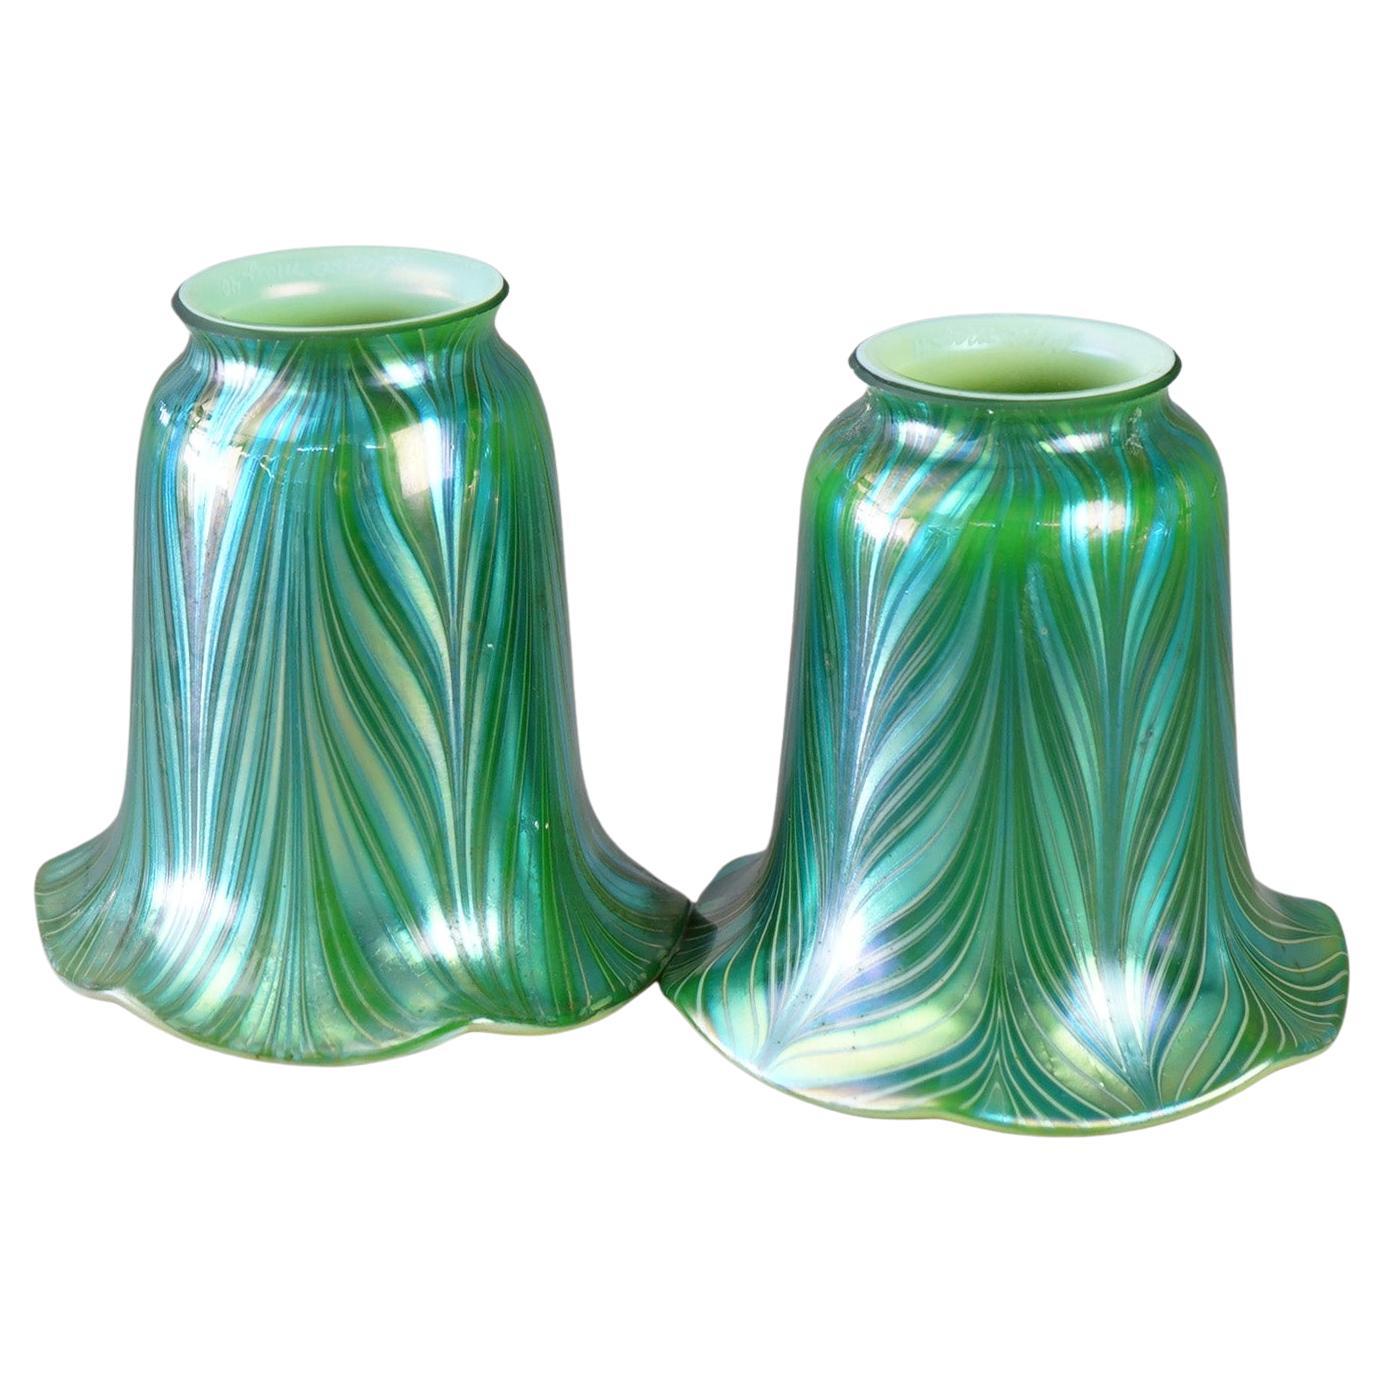 Antique Arts and Crafts Pair of Orient & Flume Green Decorated Art Glass Lamp Shades, Signed, C1920

Measures - 4.5